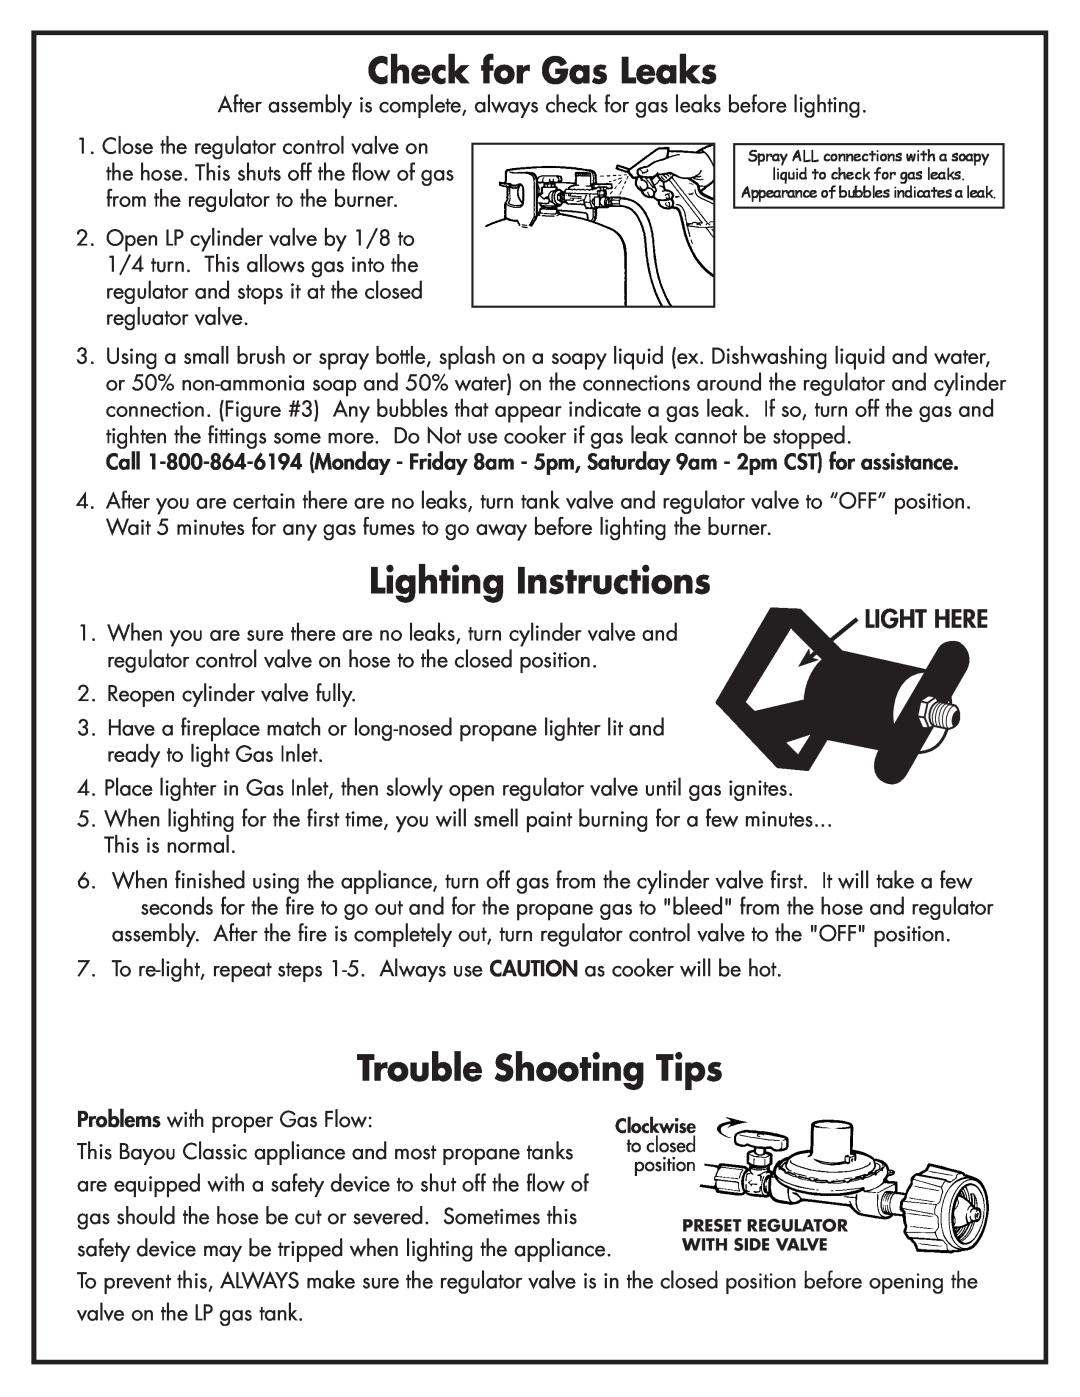 Bayou Classic 700-701 manual Check for Gas Leaks, Lighting Instructions, Trouble Shooting Tips 